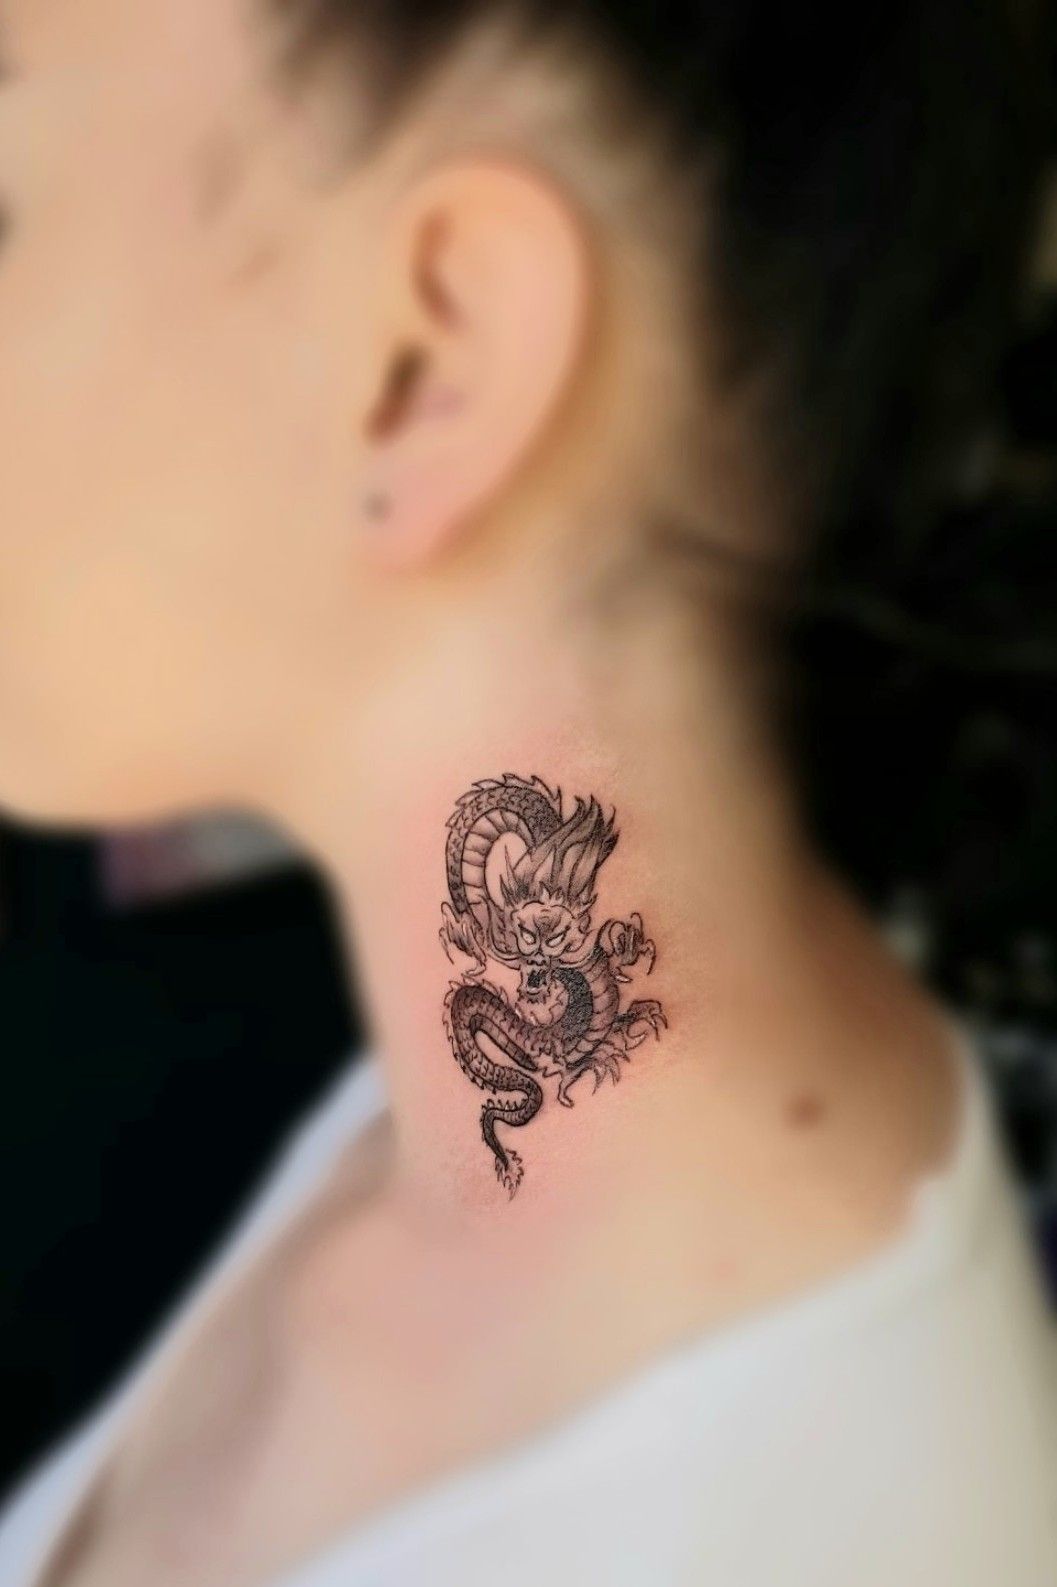 Tattoo tagged with flower fine line small kanetrubenbacher little neck  tiny rose nature  inkedappcom